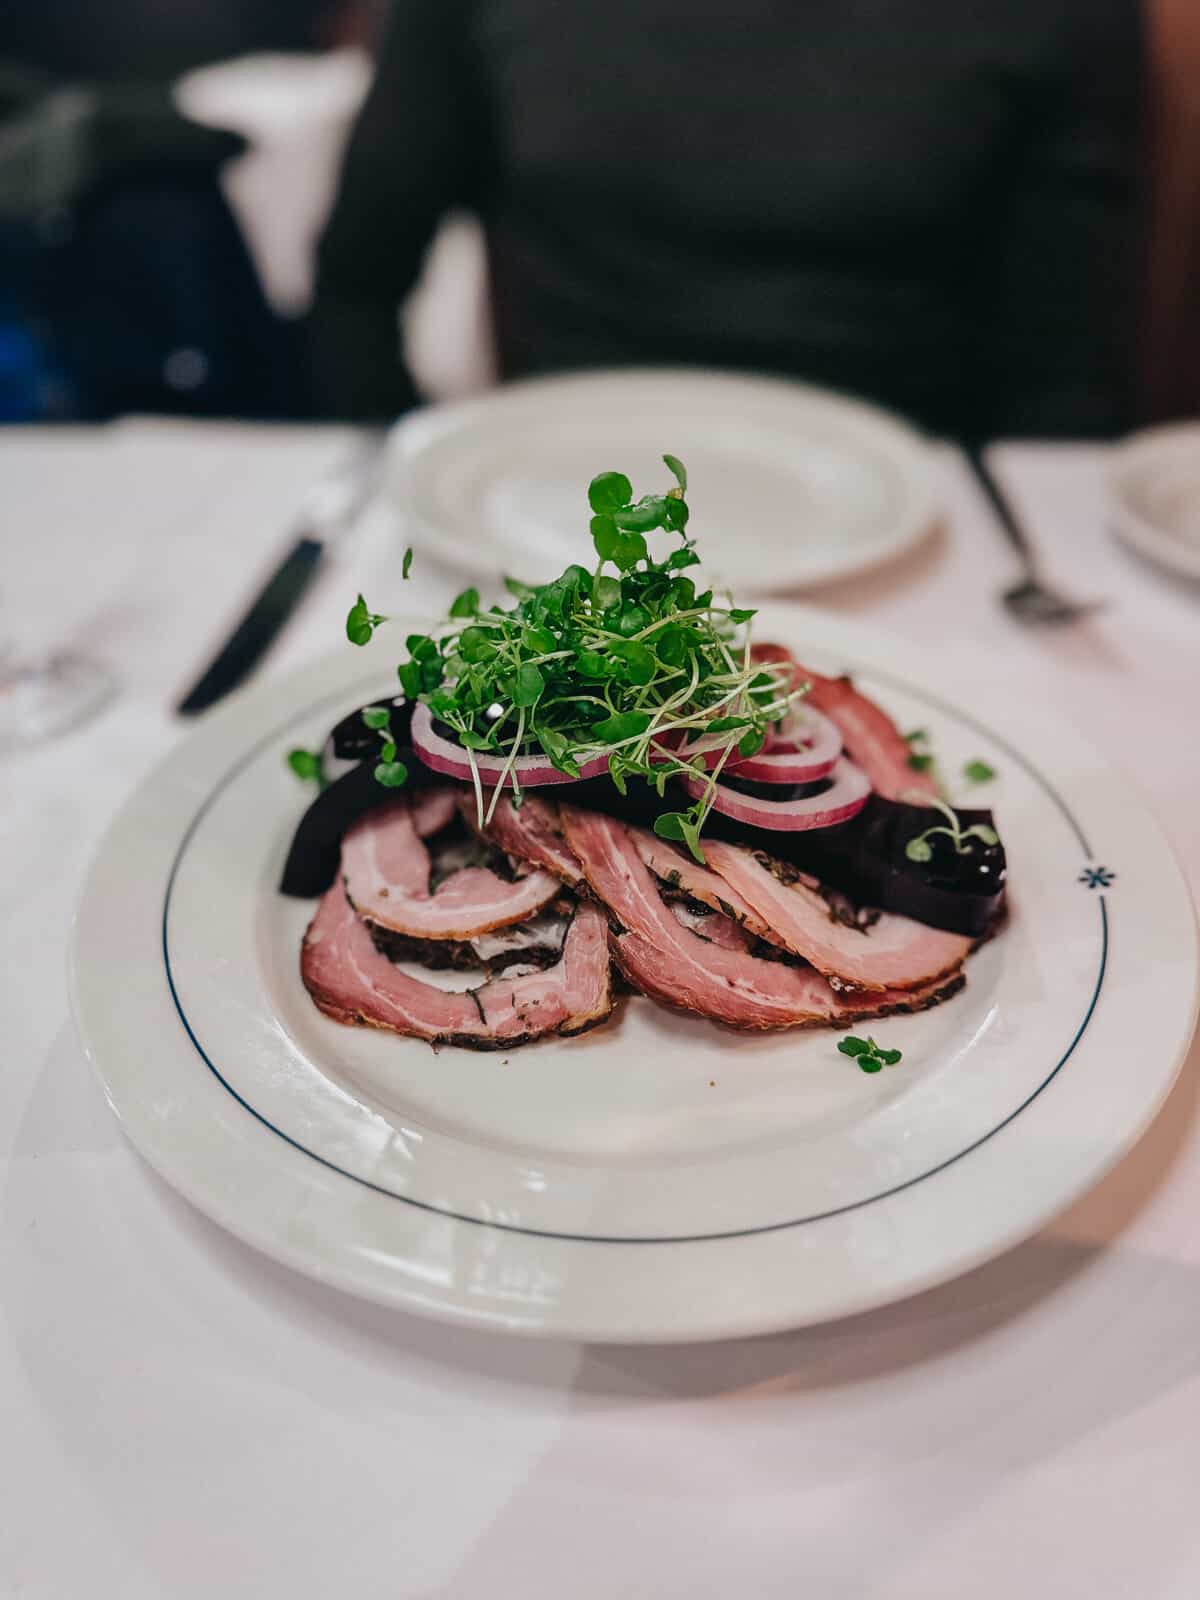 Close-up of a gourmet dish featuring slices of rolled meat with herbs and beetroot, presented elegantly on a white porcelain plate with a navy blue rim, ready for a fine dining experience.